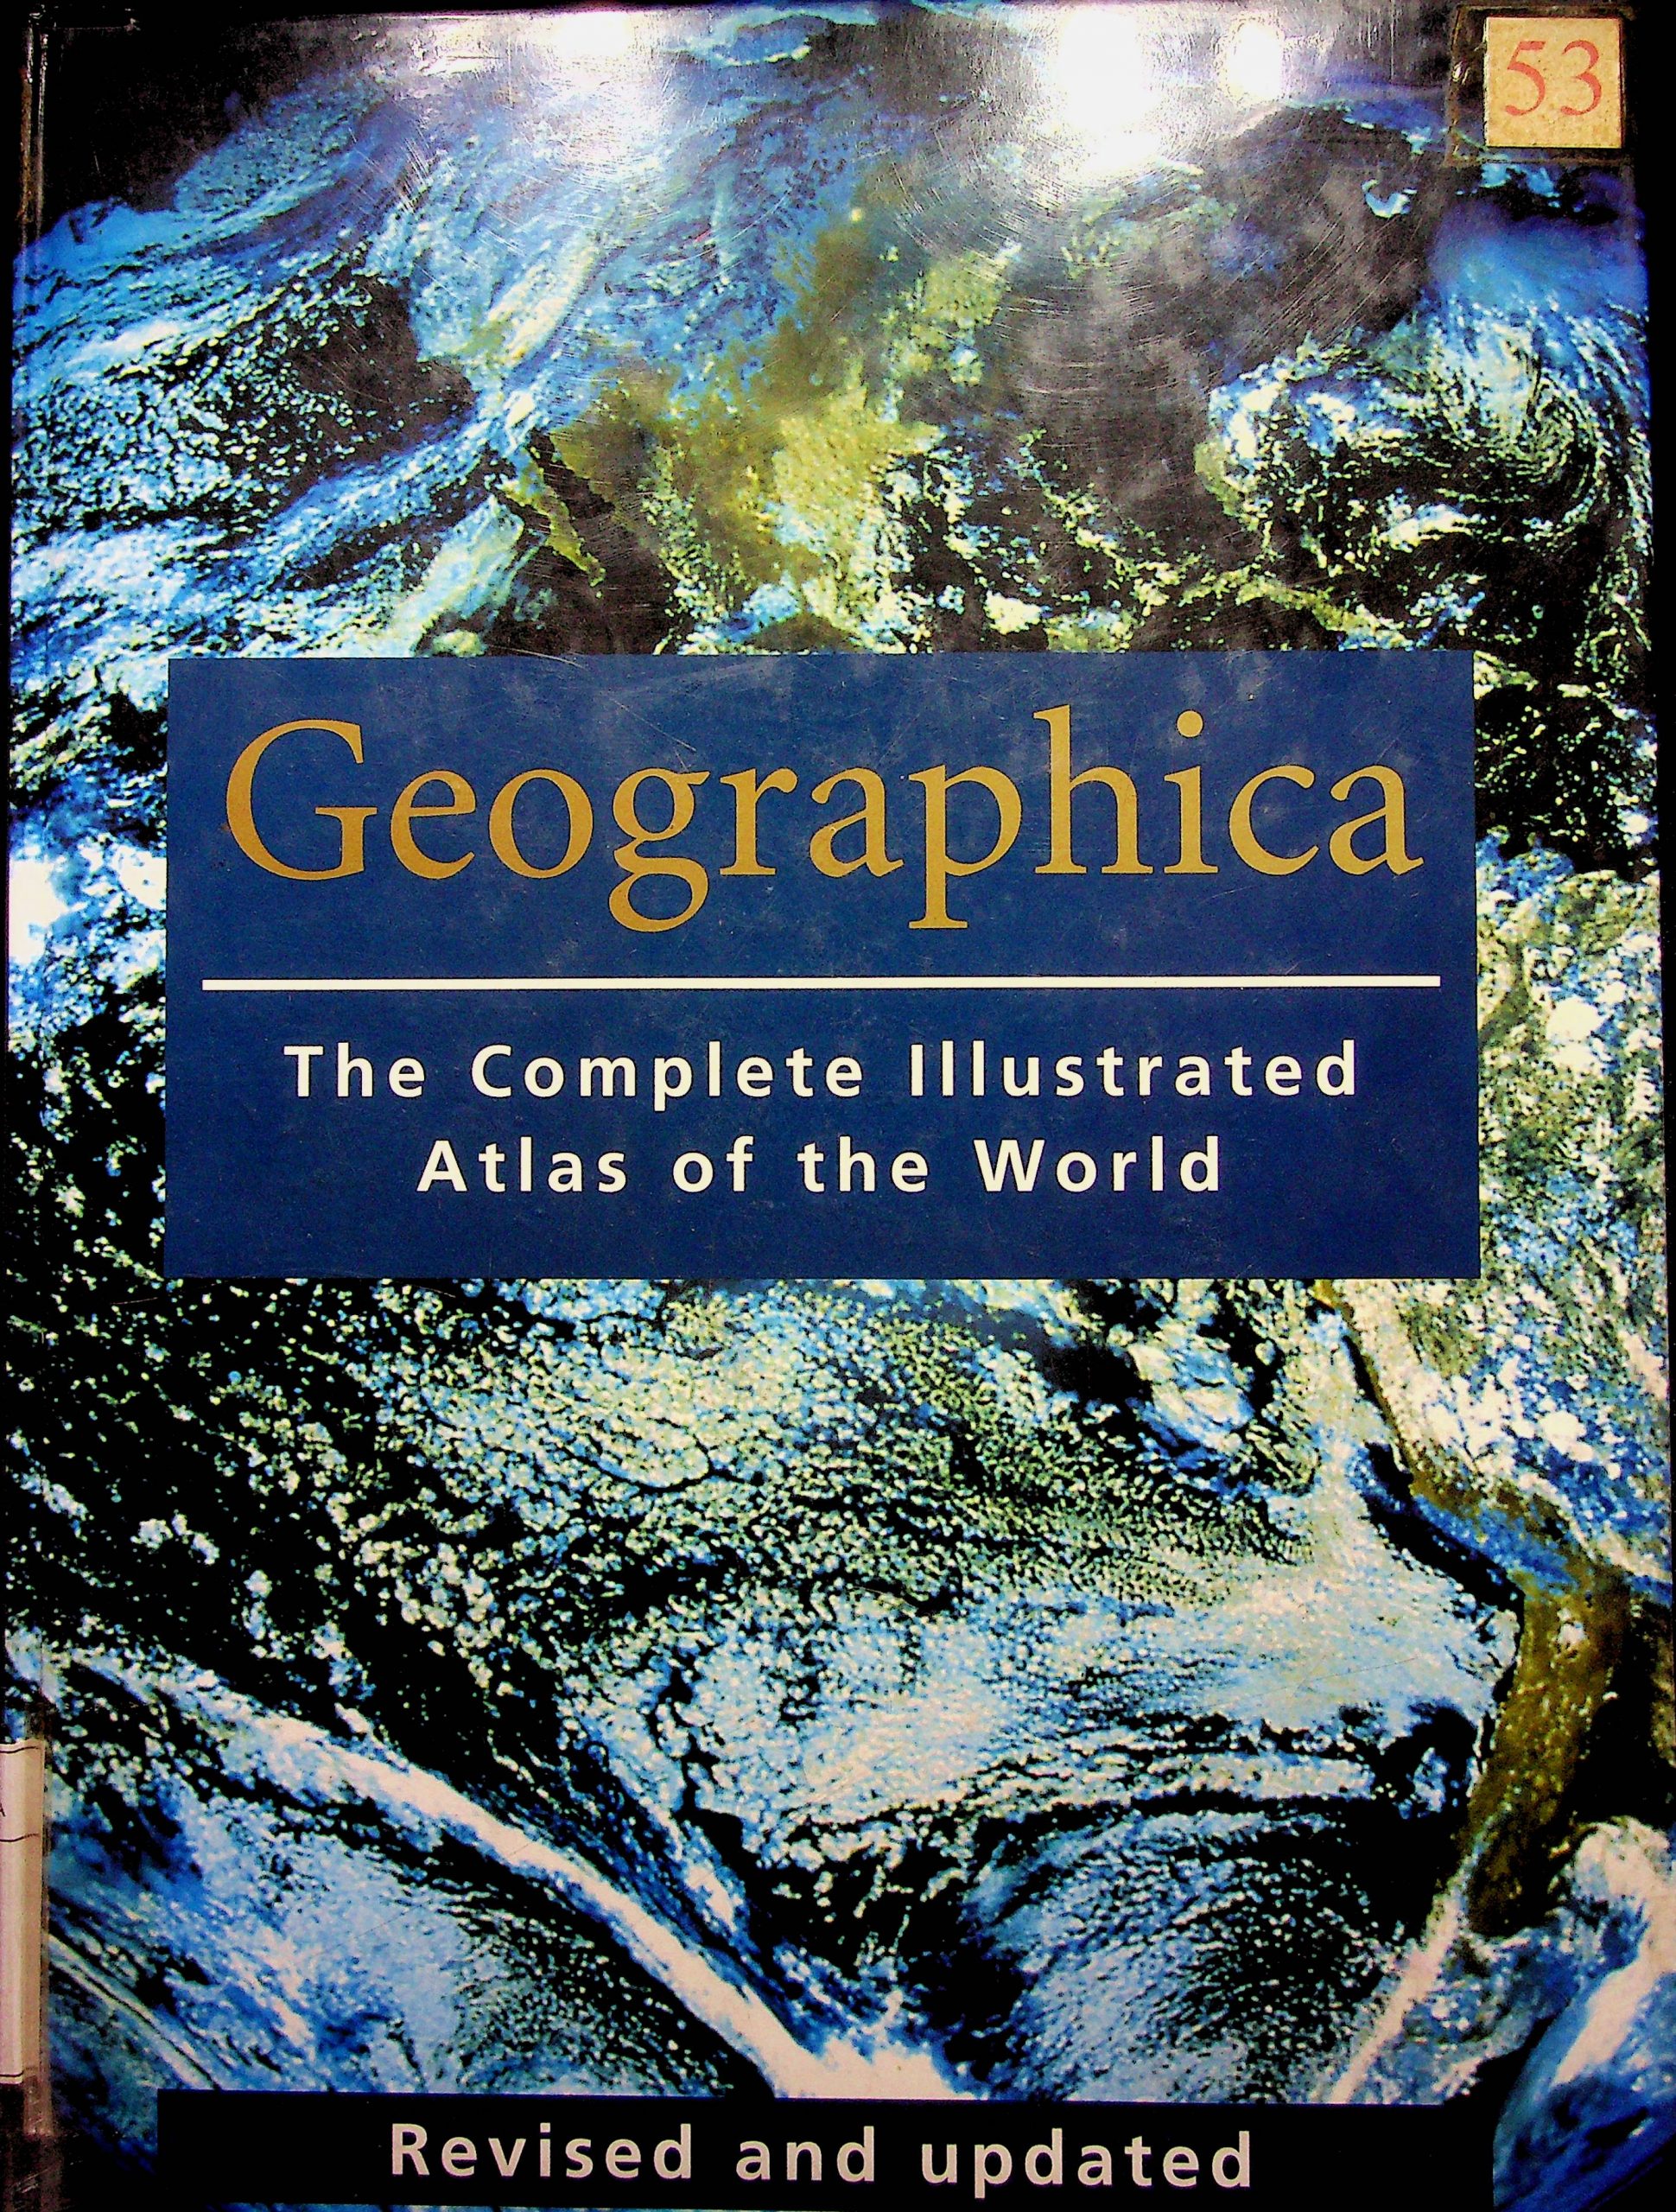 Geographica The Complete Illustrated Atlas of the World - BMKG e